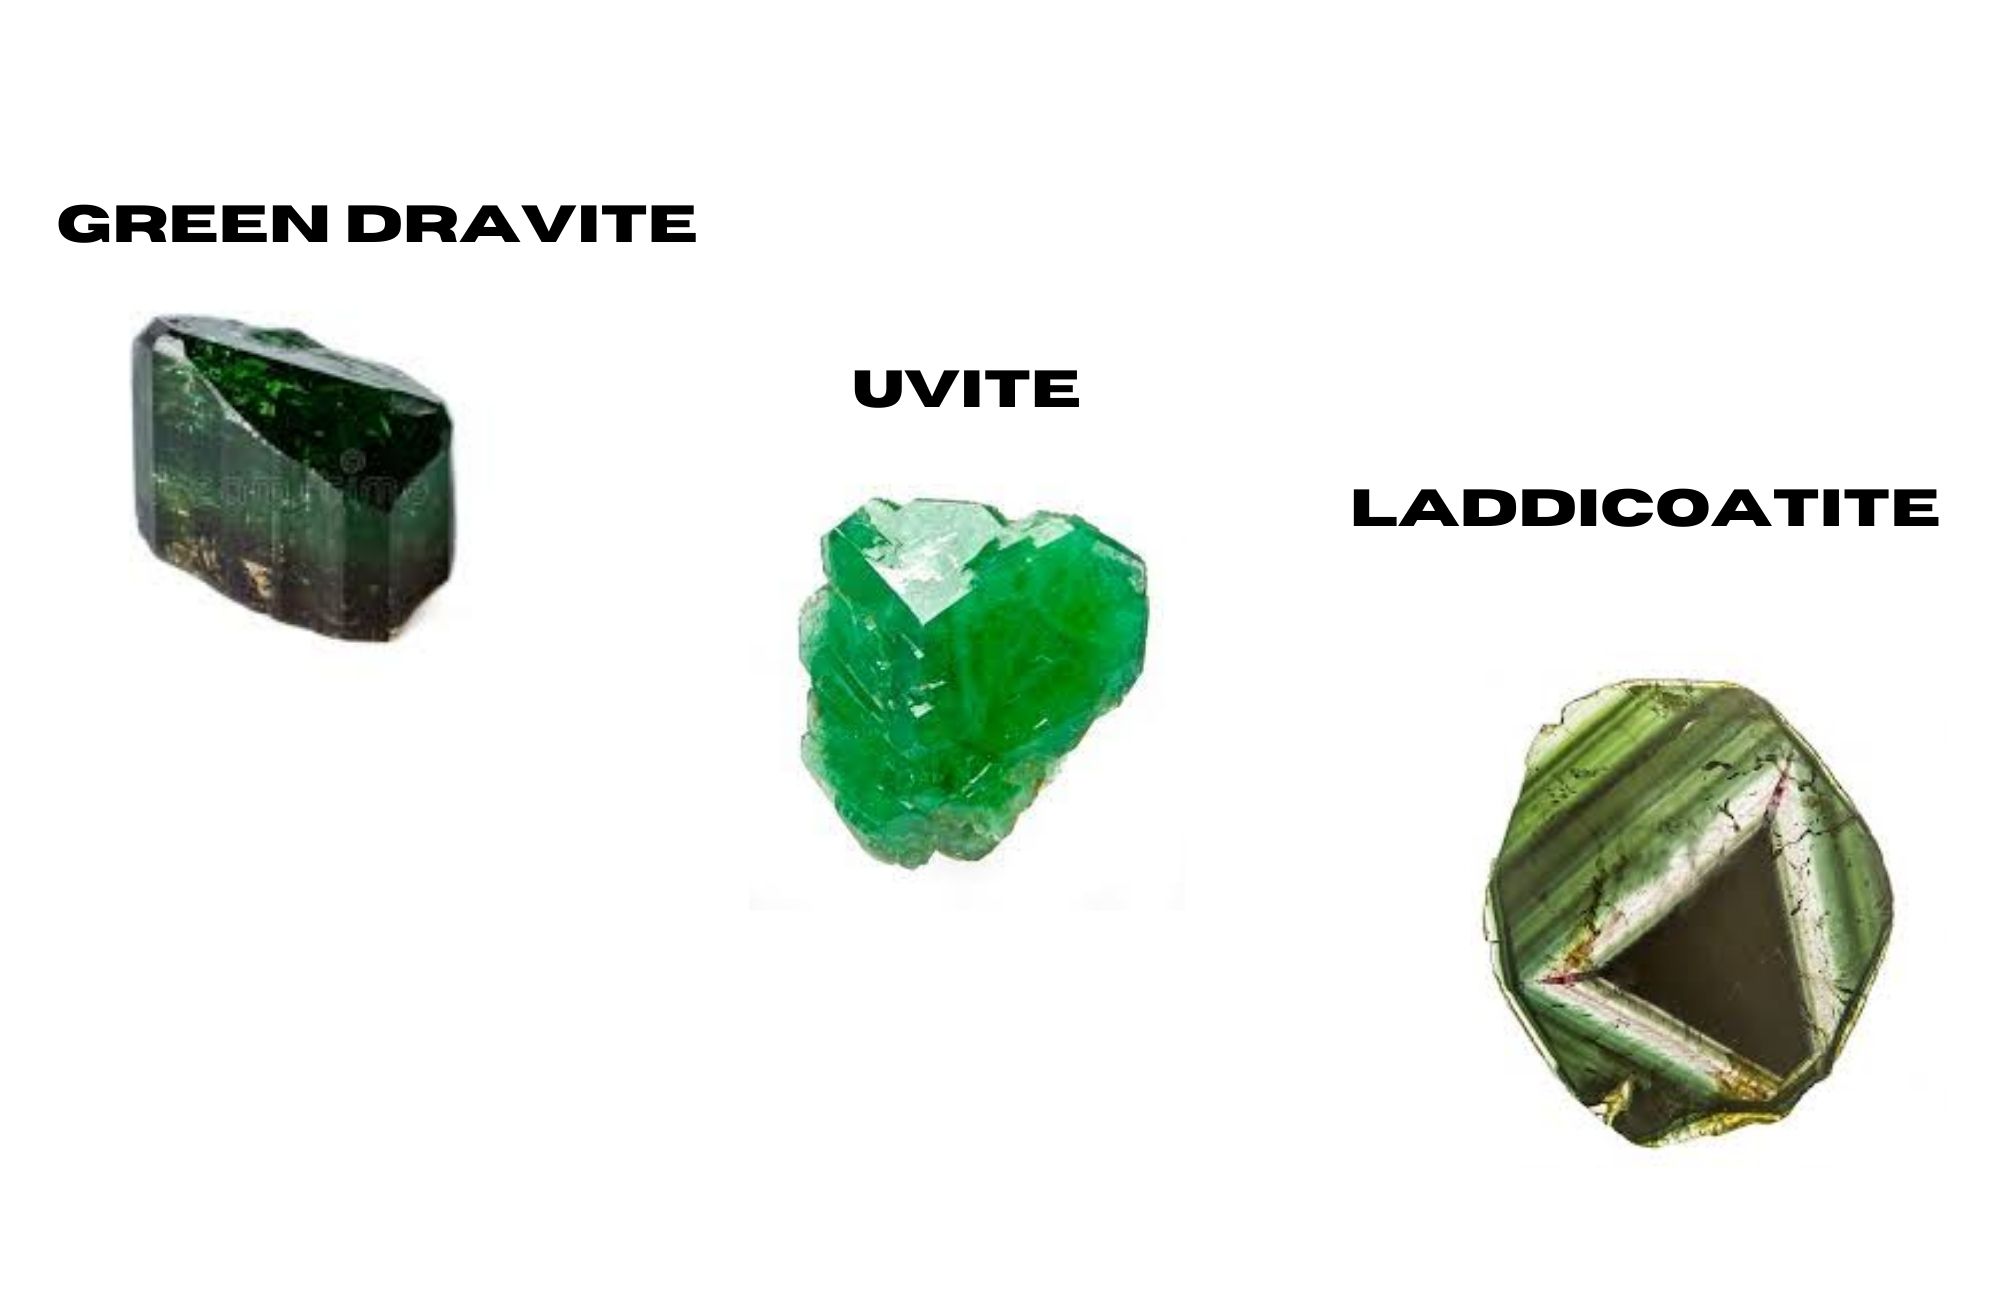 The three kinds of green tourmaline, such as green Dravite, Uvite, and Laddicoatite, on a white background